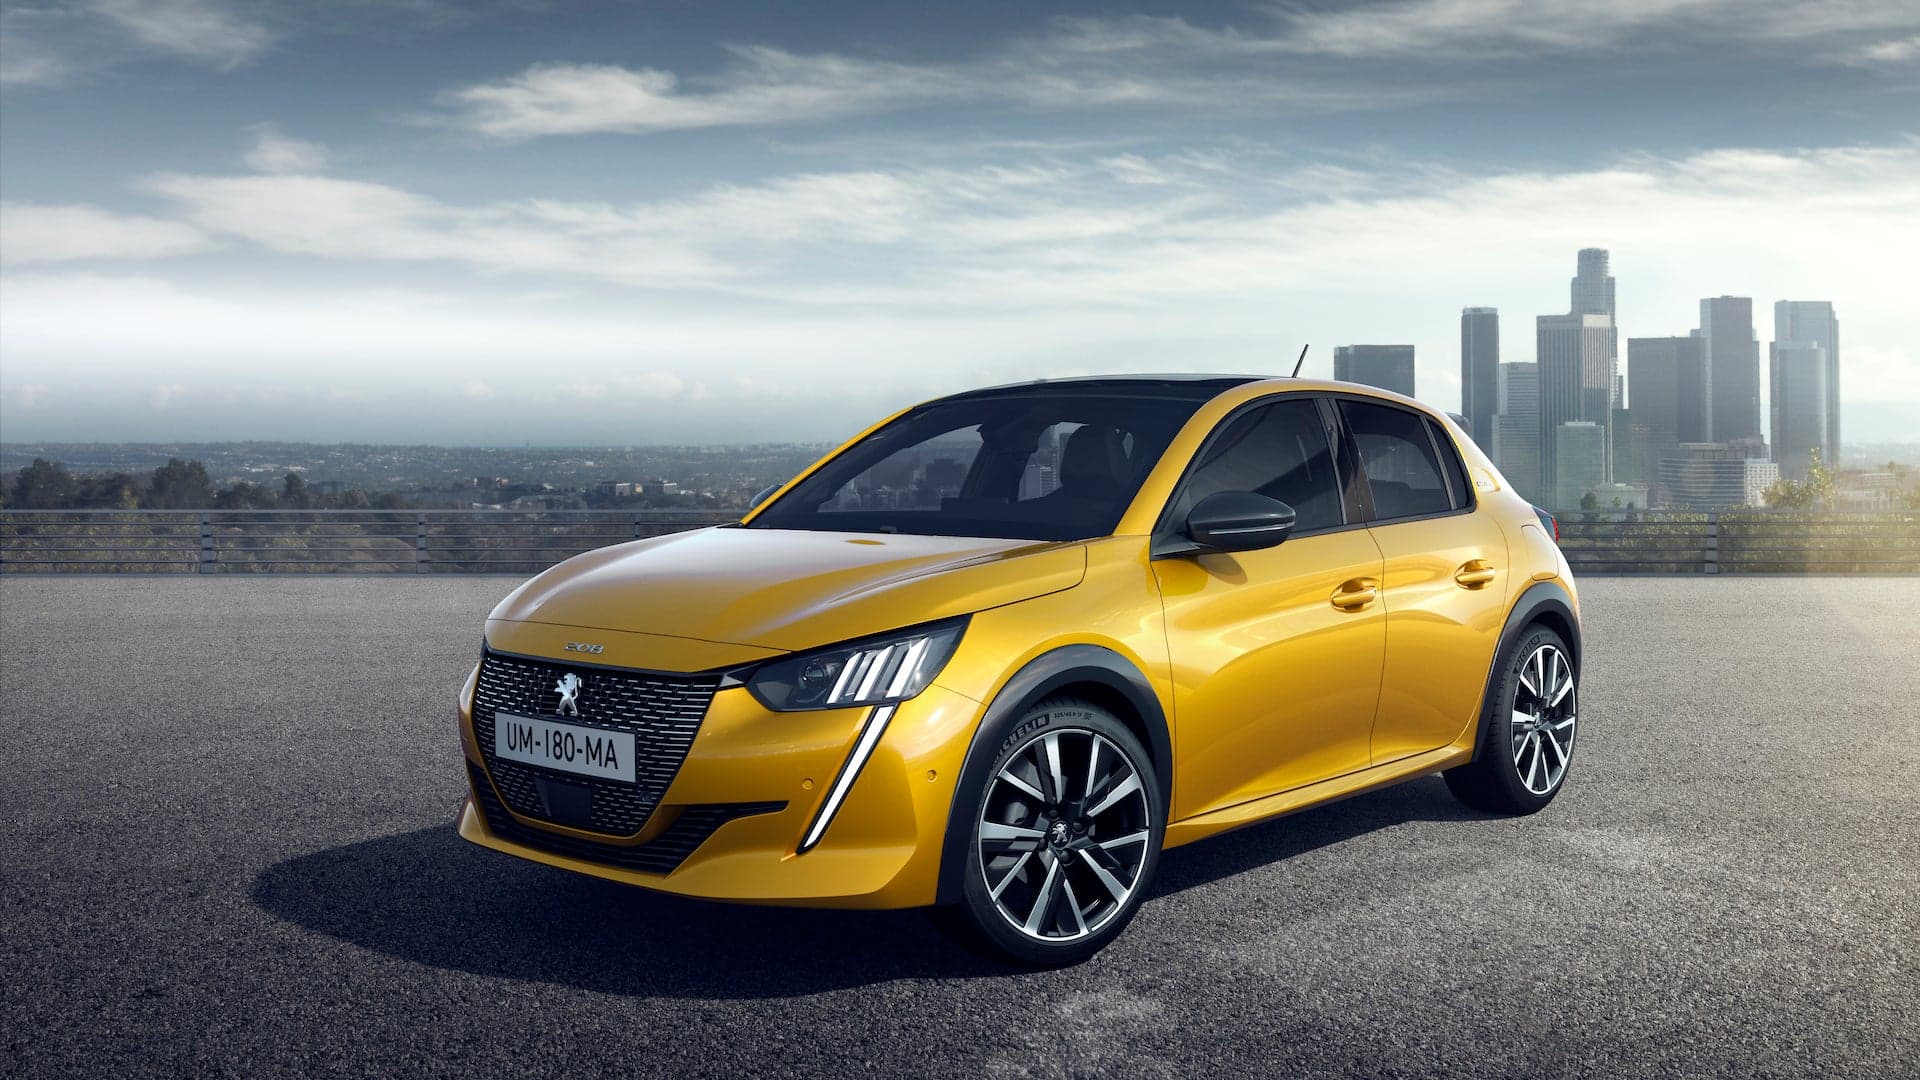 Peugeot Is Coming Back to the United States After a 28-Year Hiatus